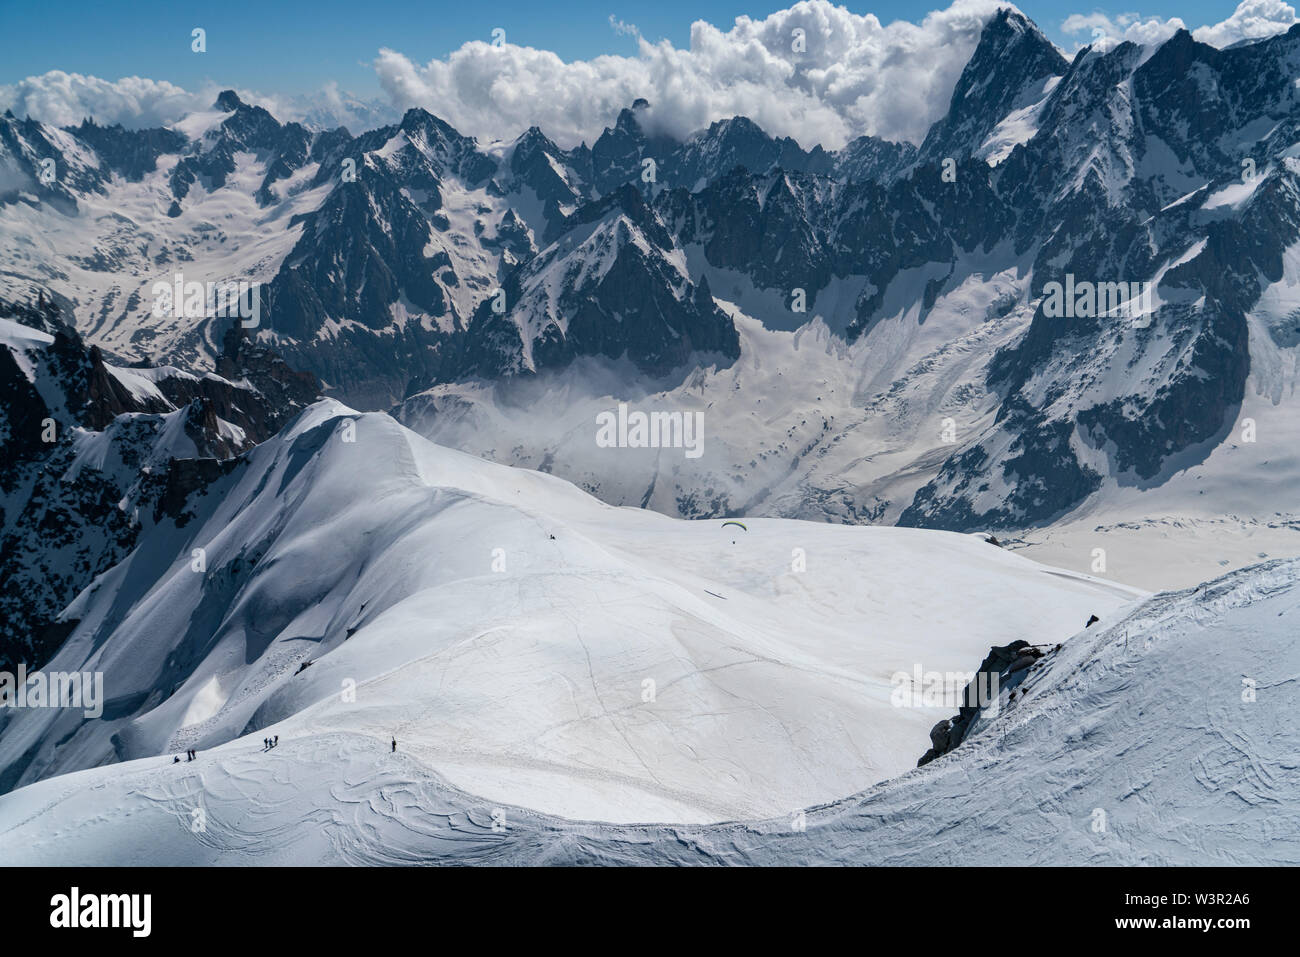 Alpine scenery with mountaineers down on a glacier Stock Photo